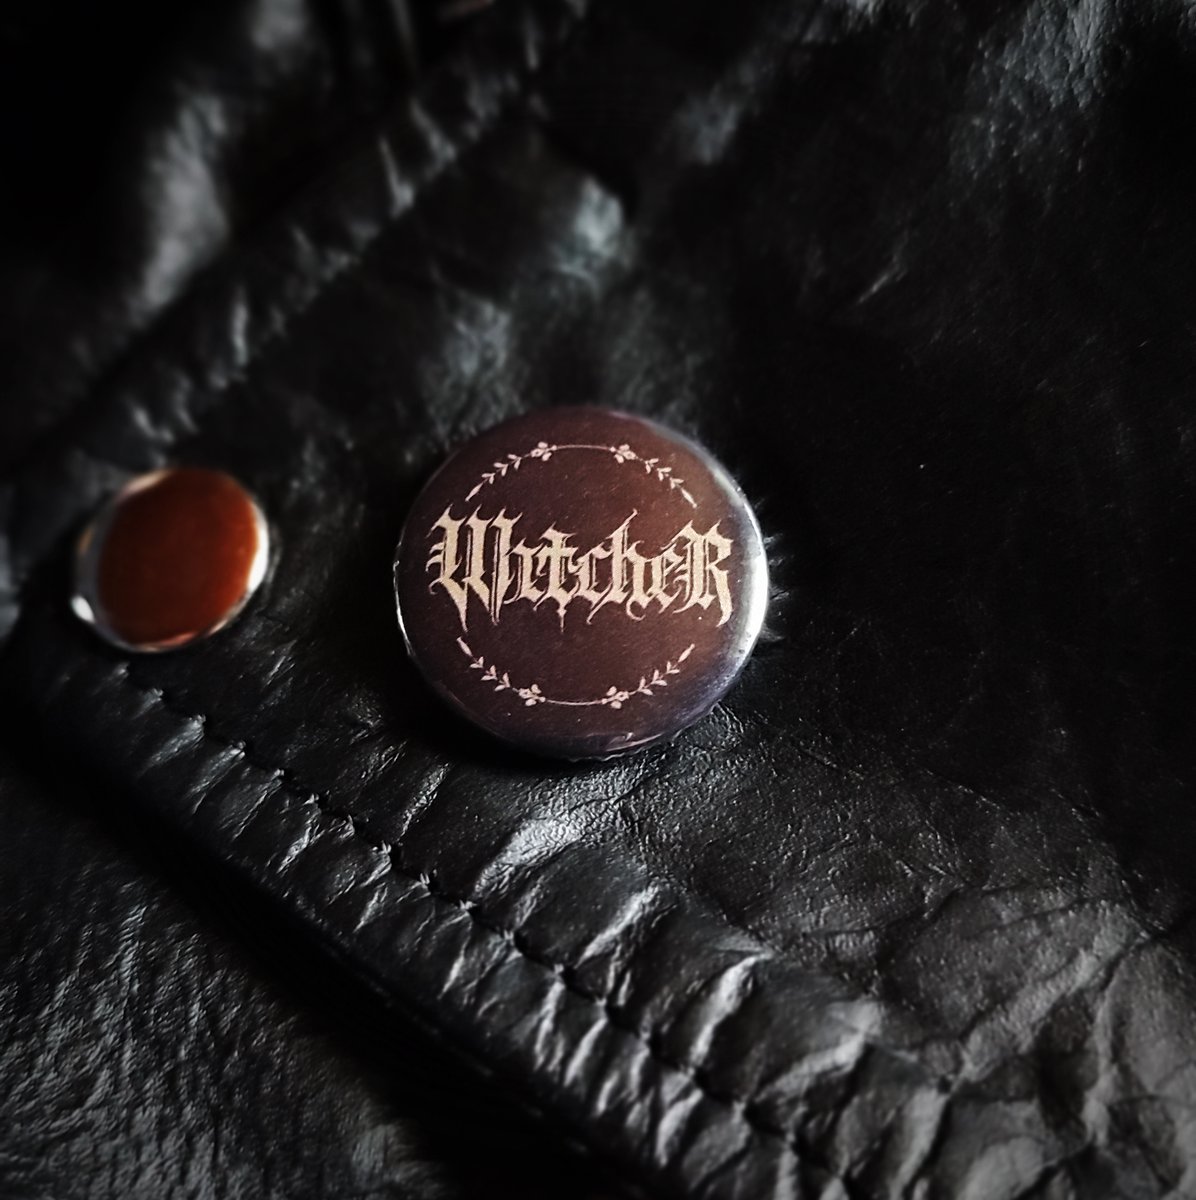 New and free WitcheR pins for for the orders... 🤘

#witcher #witcherband #pin #pins #merch #blackmetal #atmosphericblackmetal #symphonicblackmetal